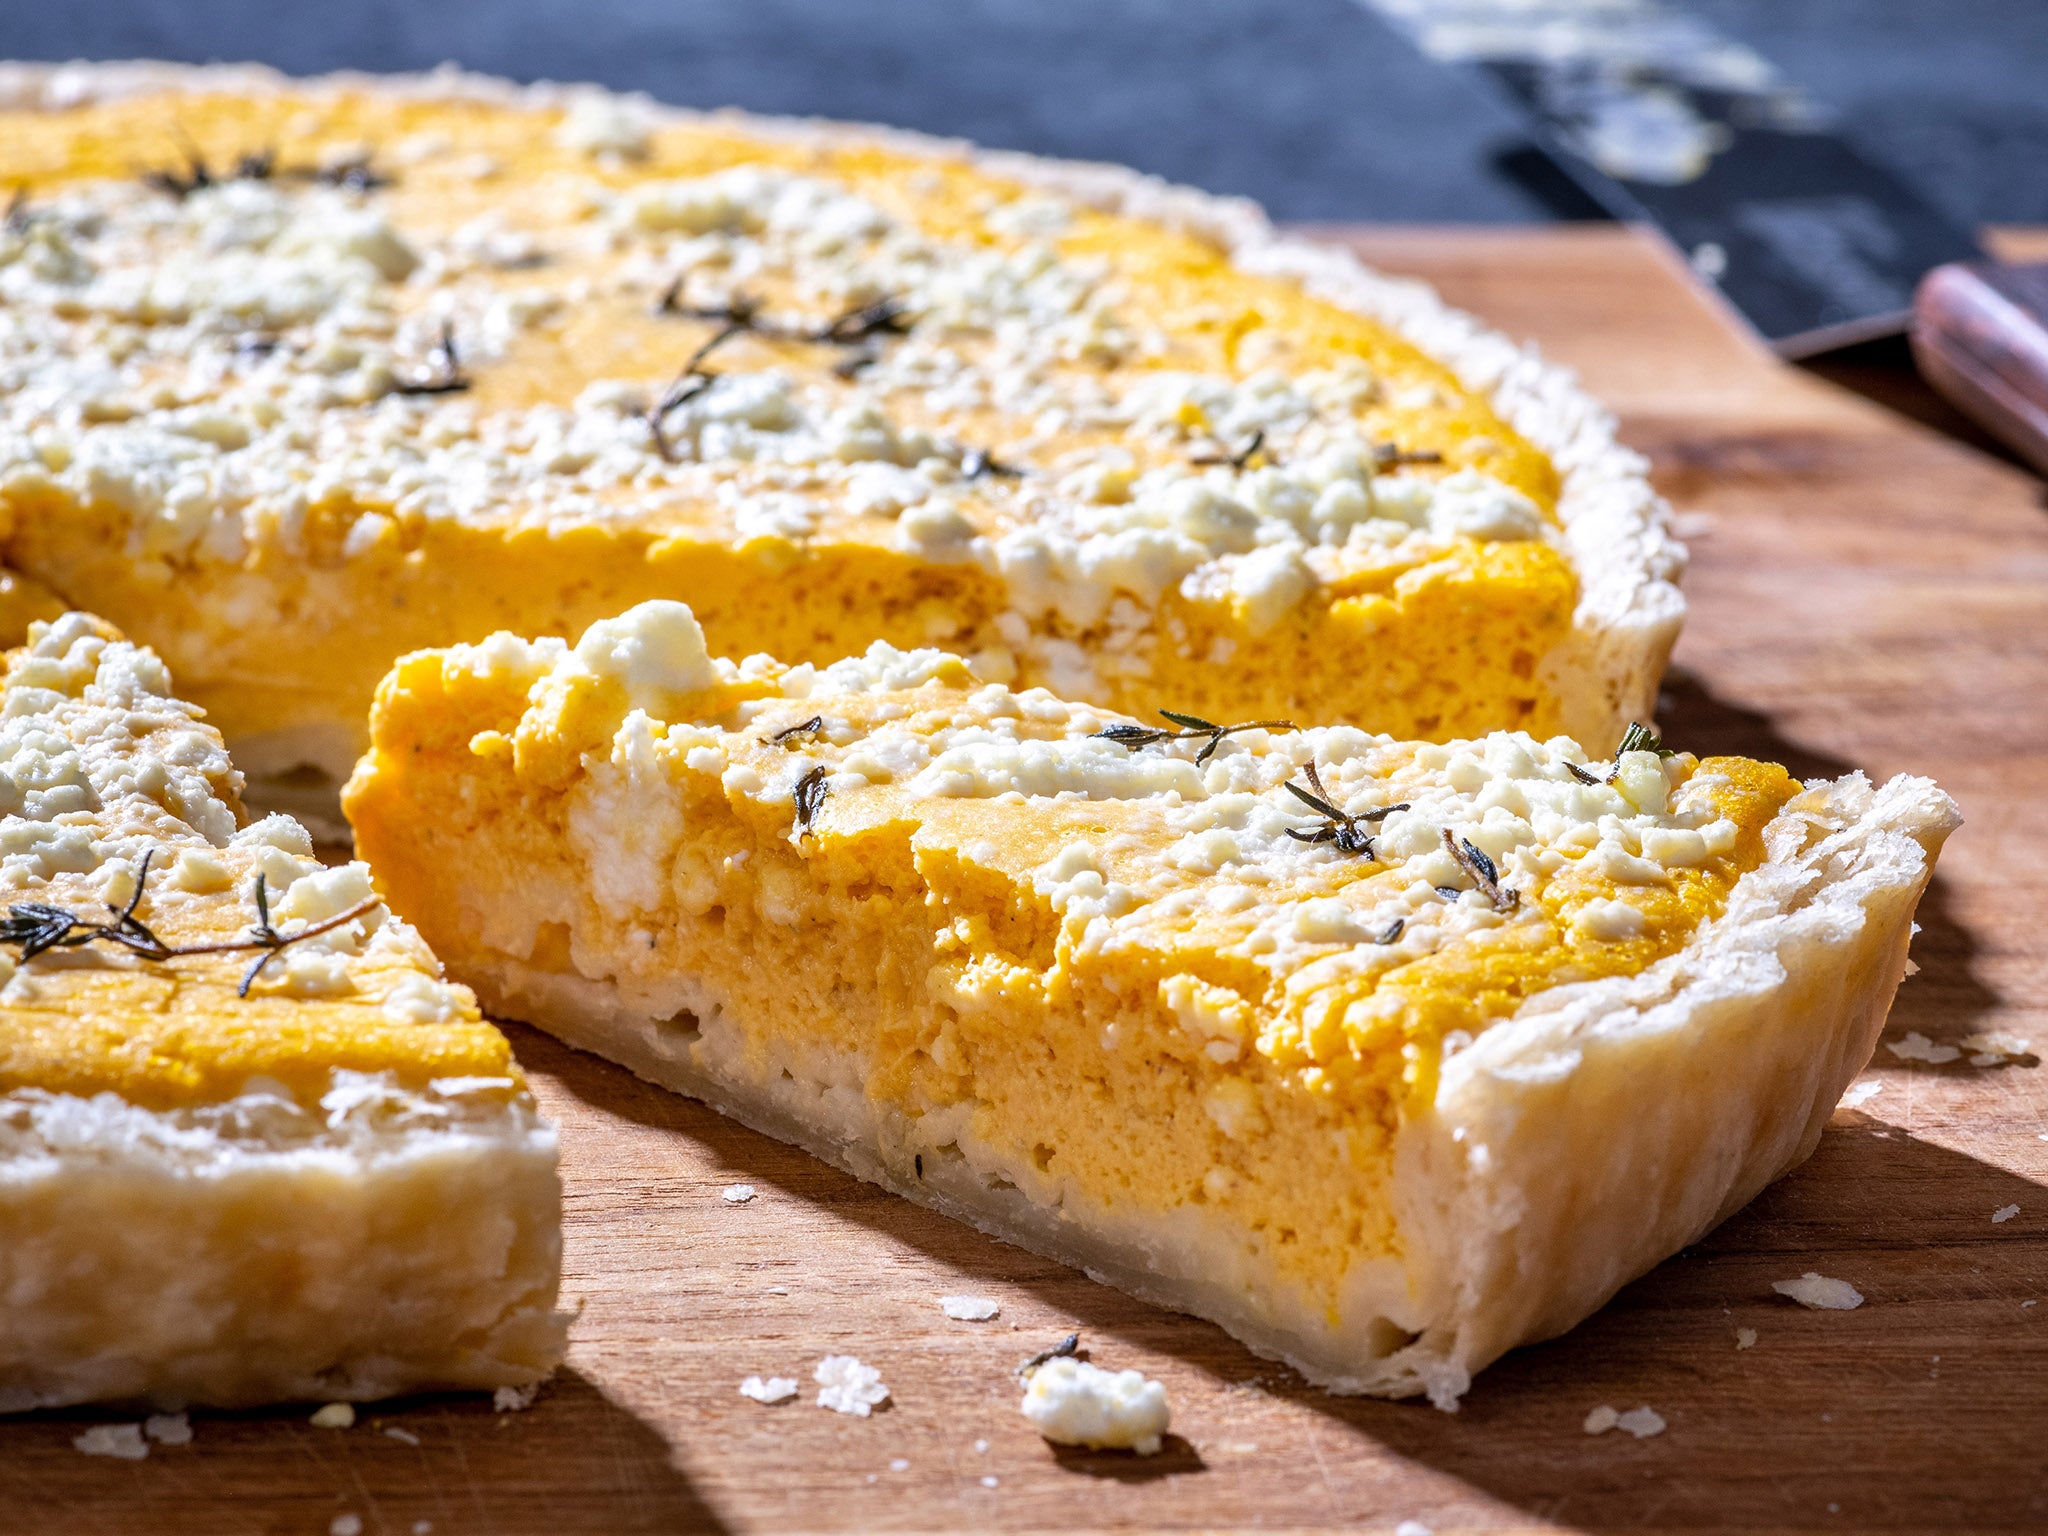 Using butternut squash will give the quiche a lighter flavour